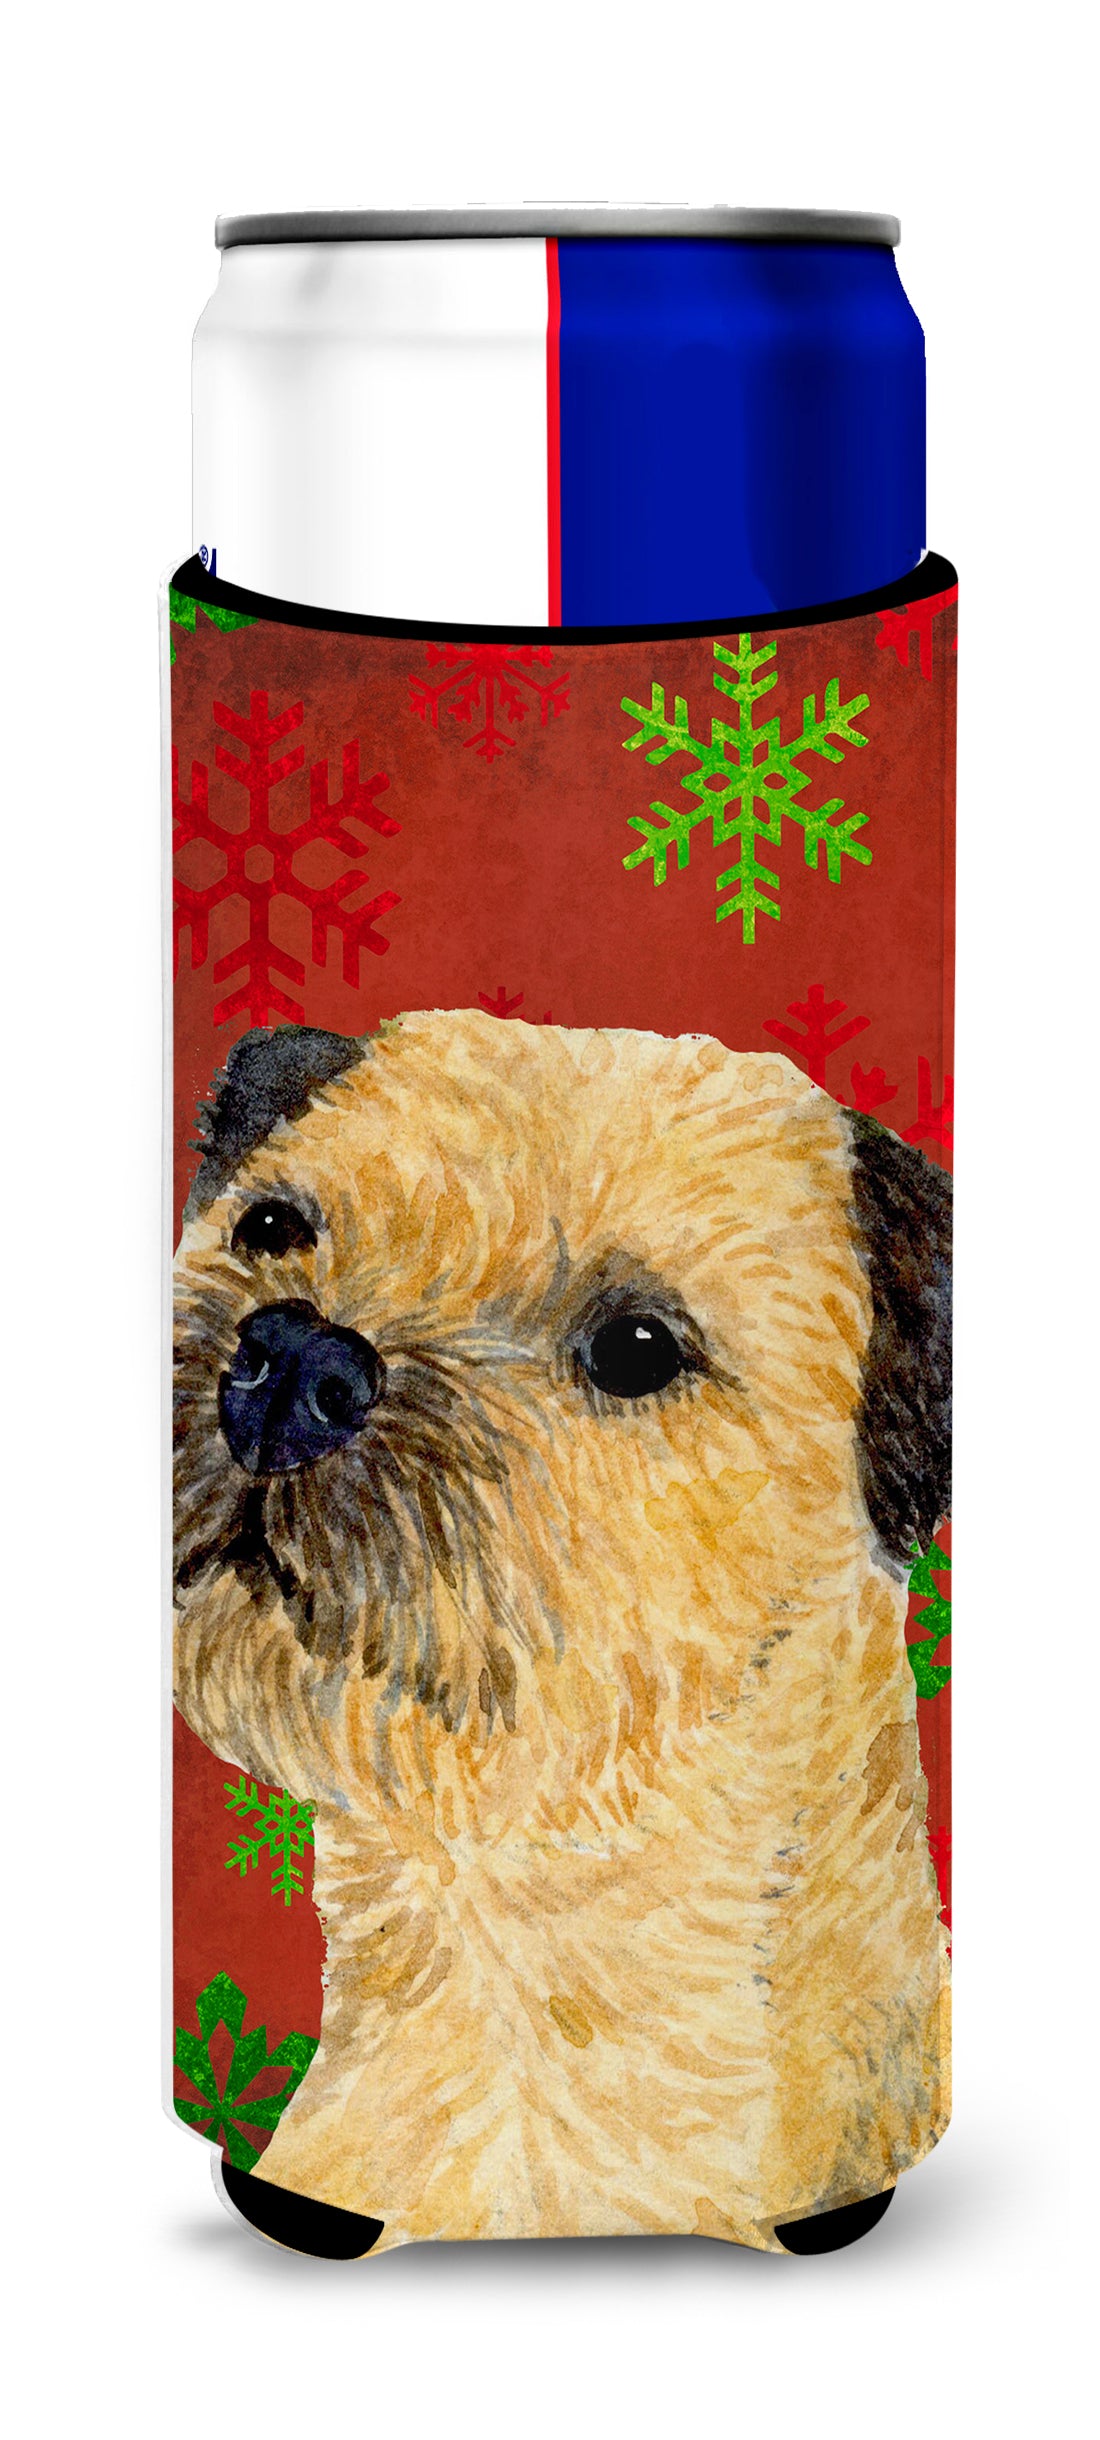 Border Terrier Red and Green Snowflakes Holiday Christmas Ultra Beverage Insulators for slim cans LH9323MUK.